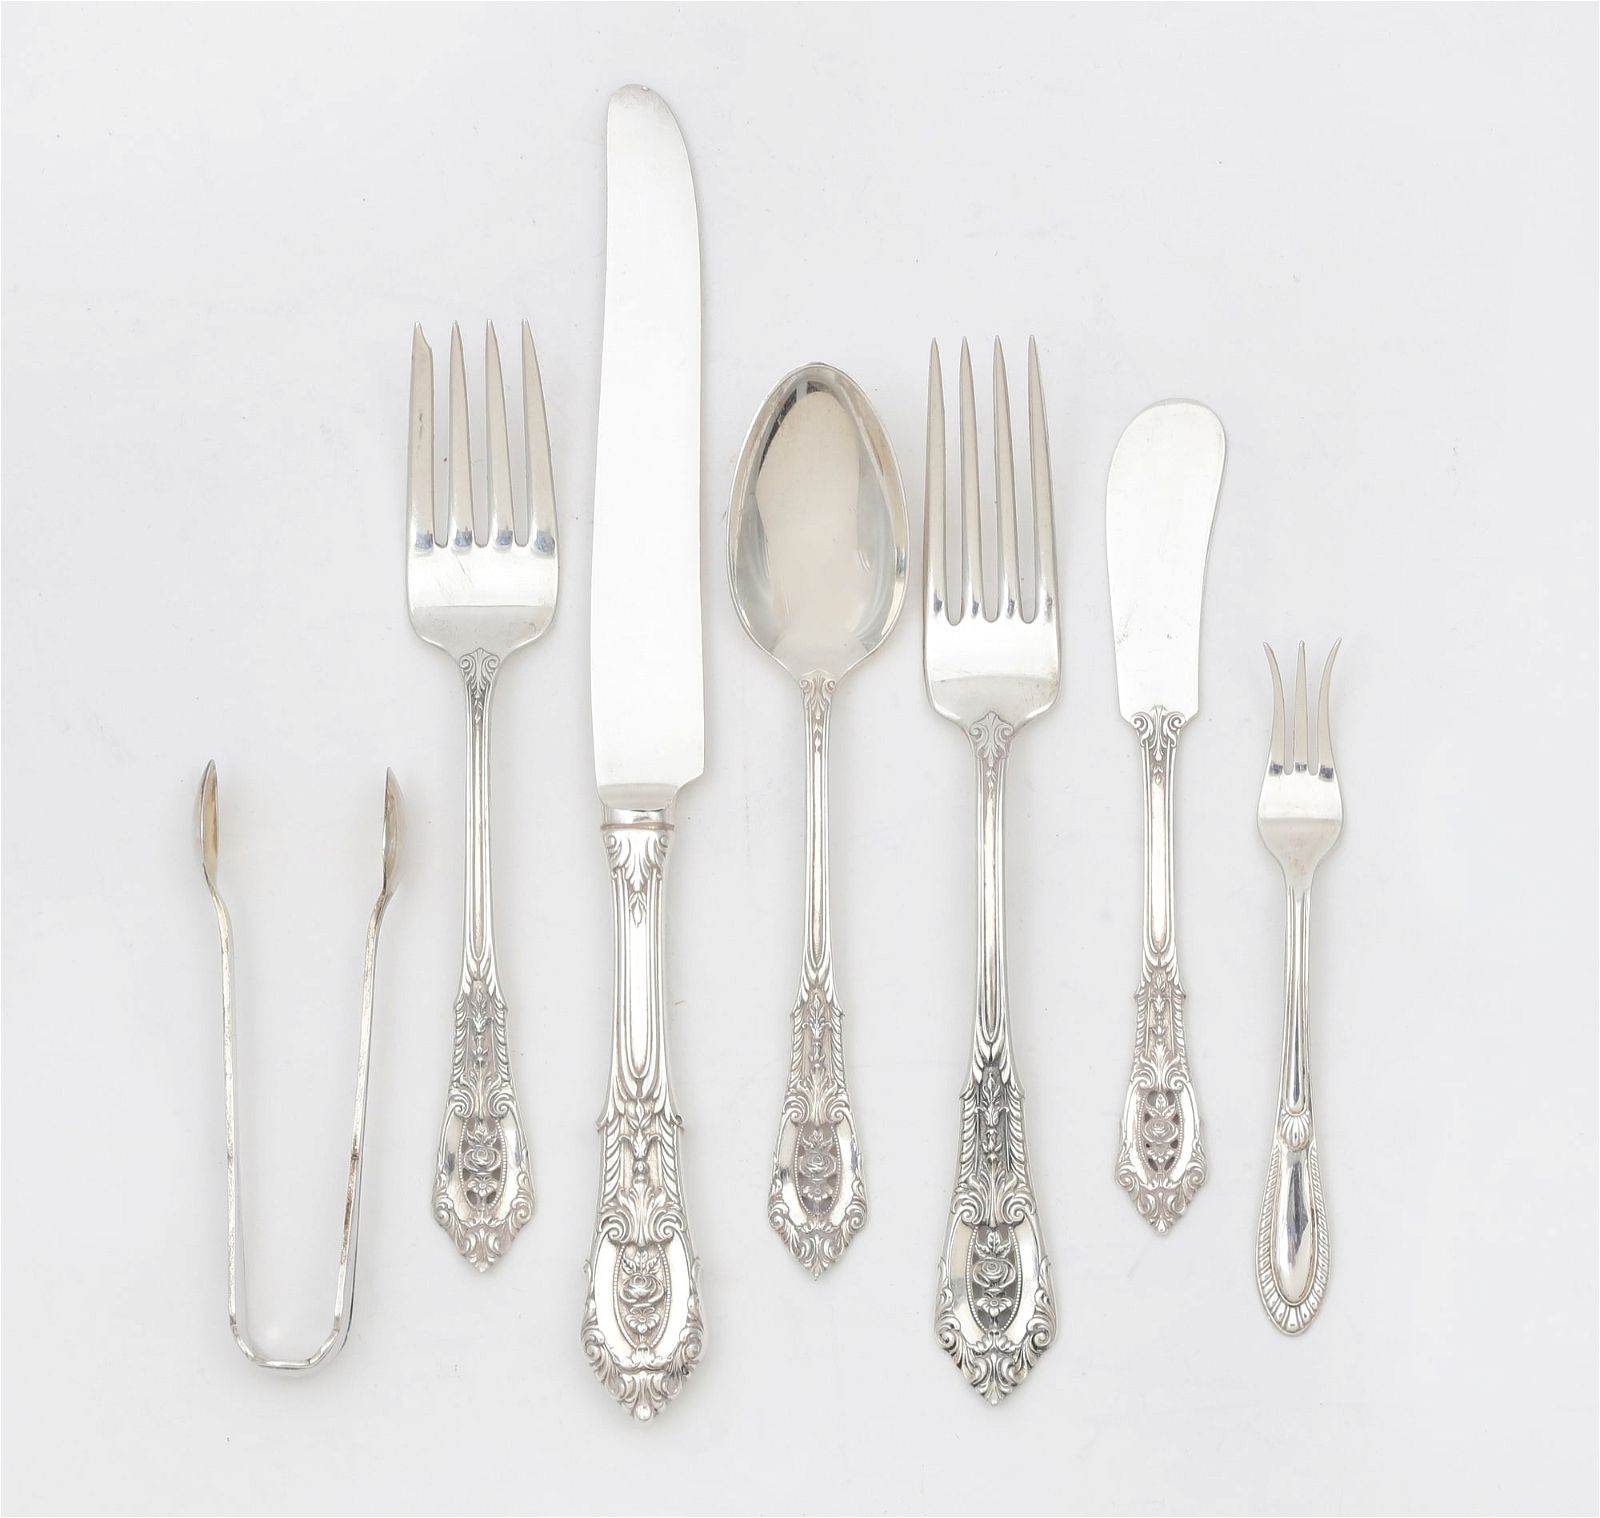 A WALLACE STERLING SILVER FLATWARE 2fb39c3